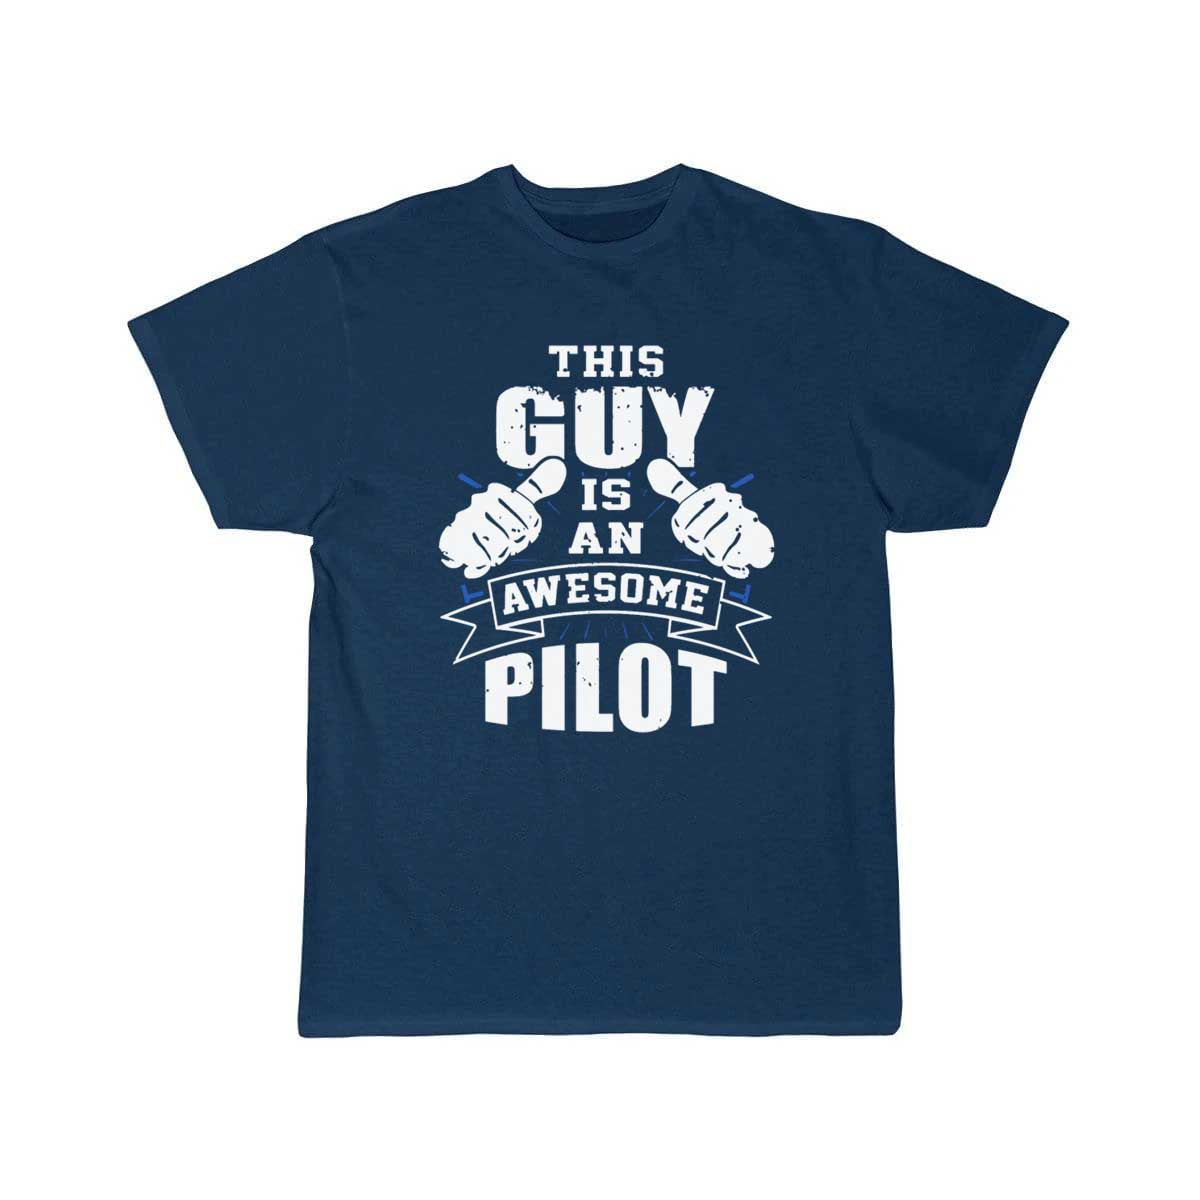 This Guy Is An Awesome Pilot Funny T-SHIRT THE AV8R